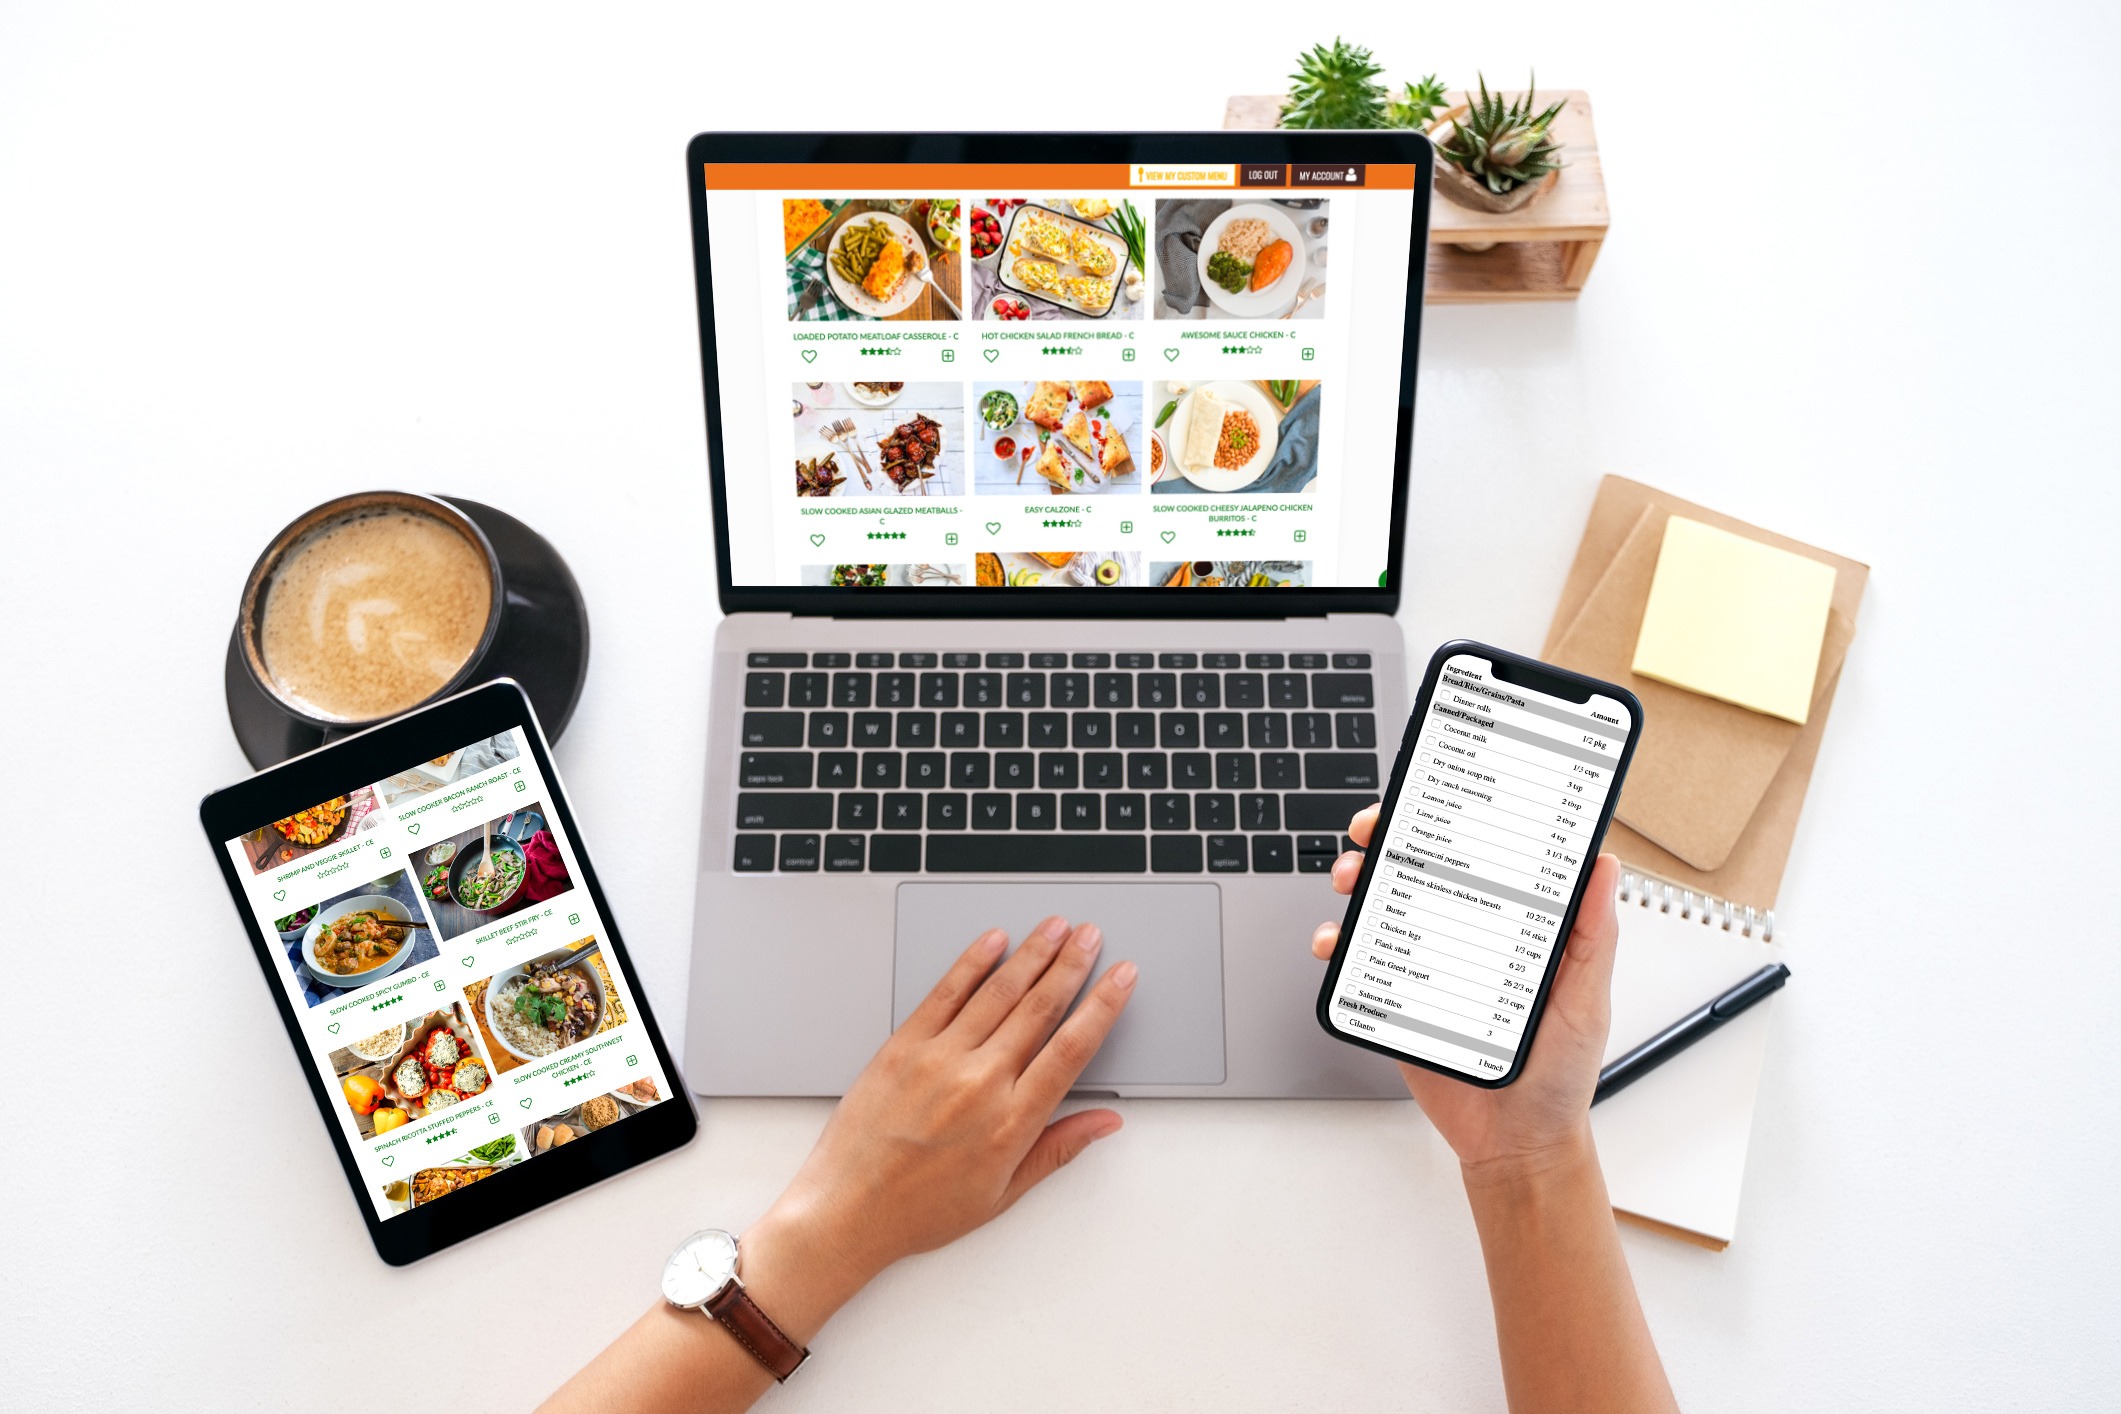 Picture of a left hand using a laptop and right hand holding a mobile phone. Both devices are running the 5 Dinners 1 Hour app.